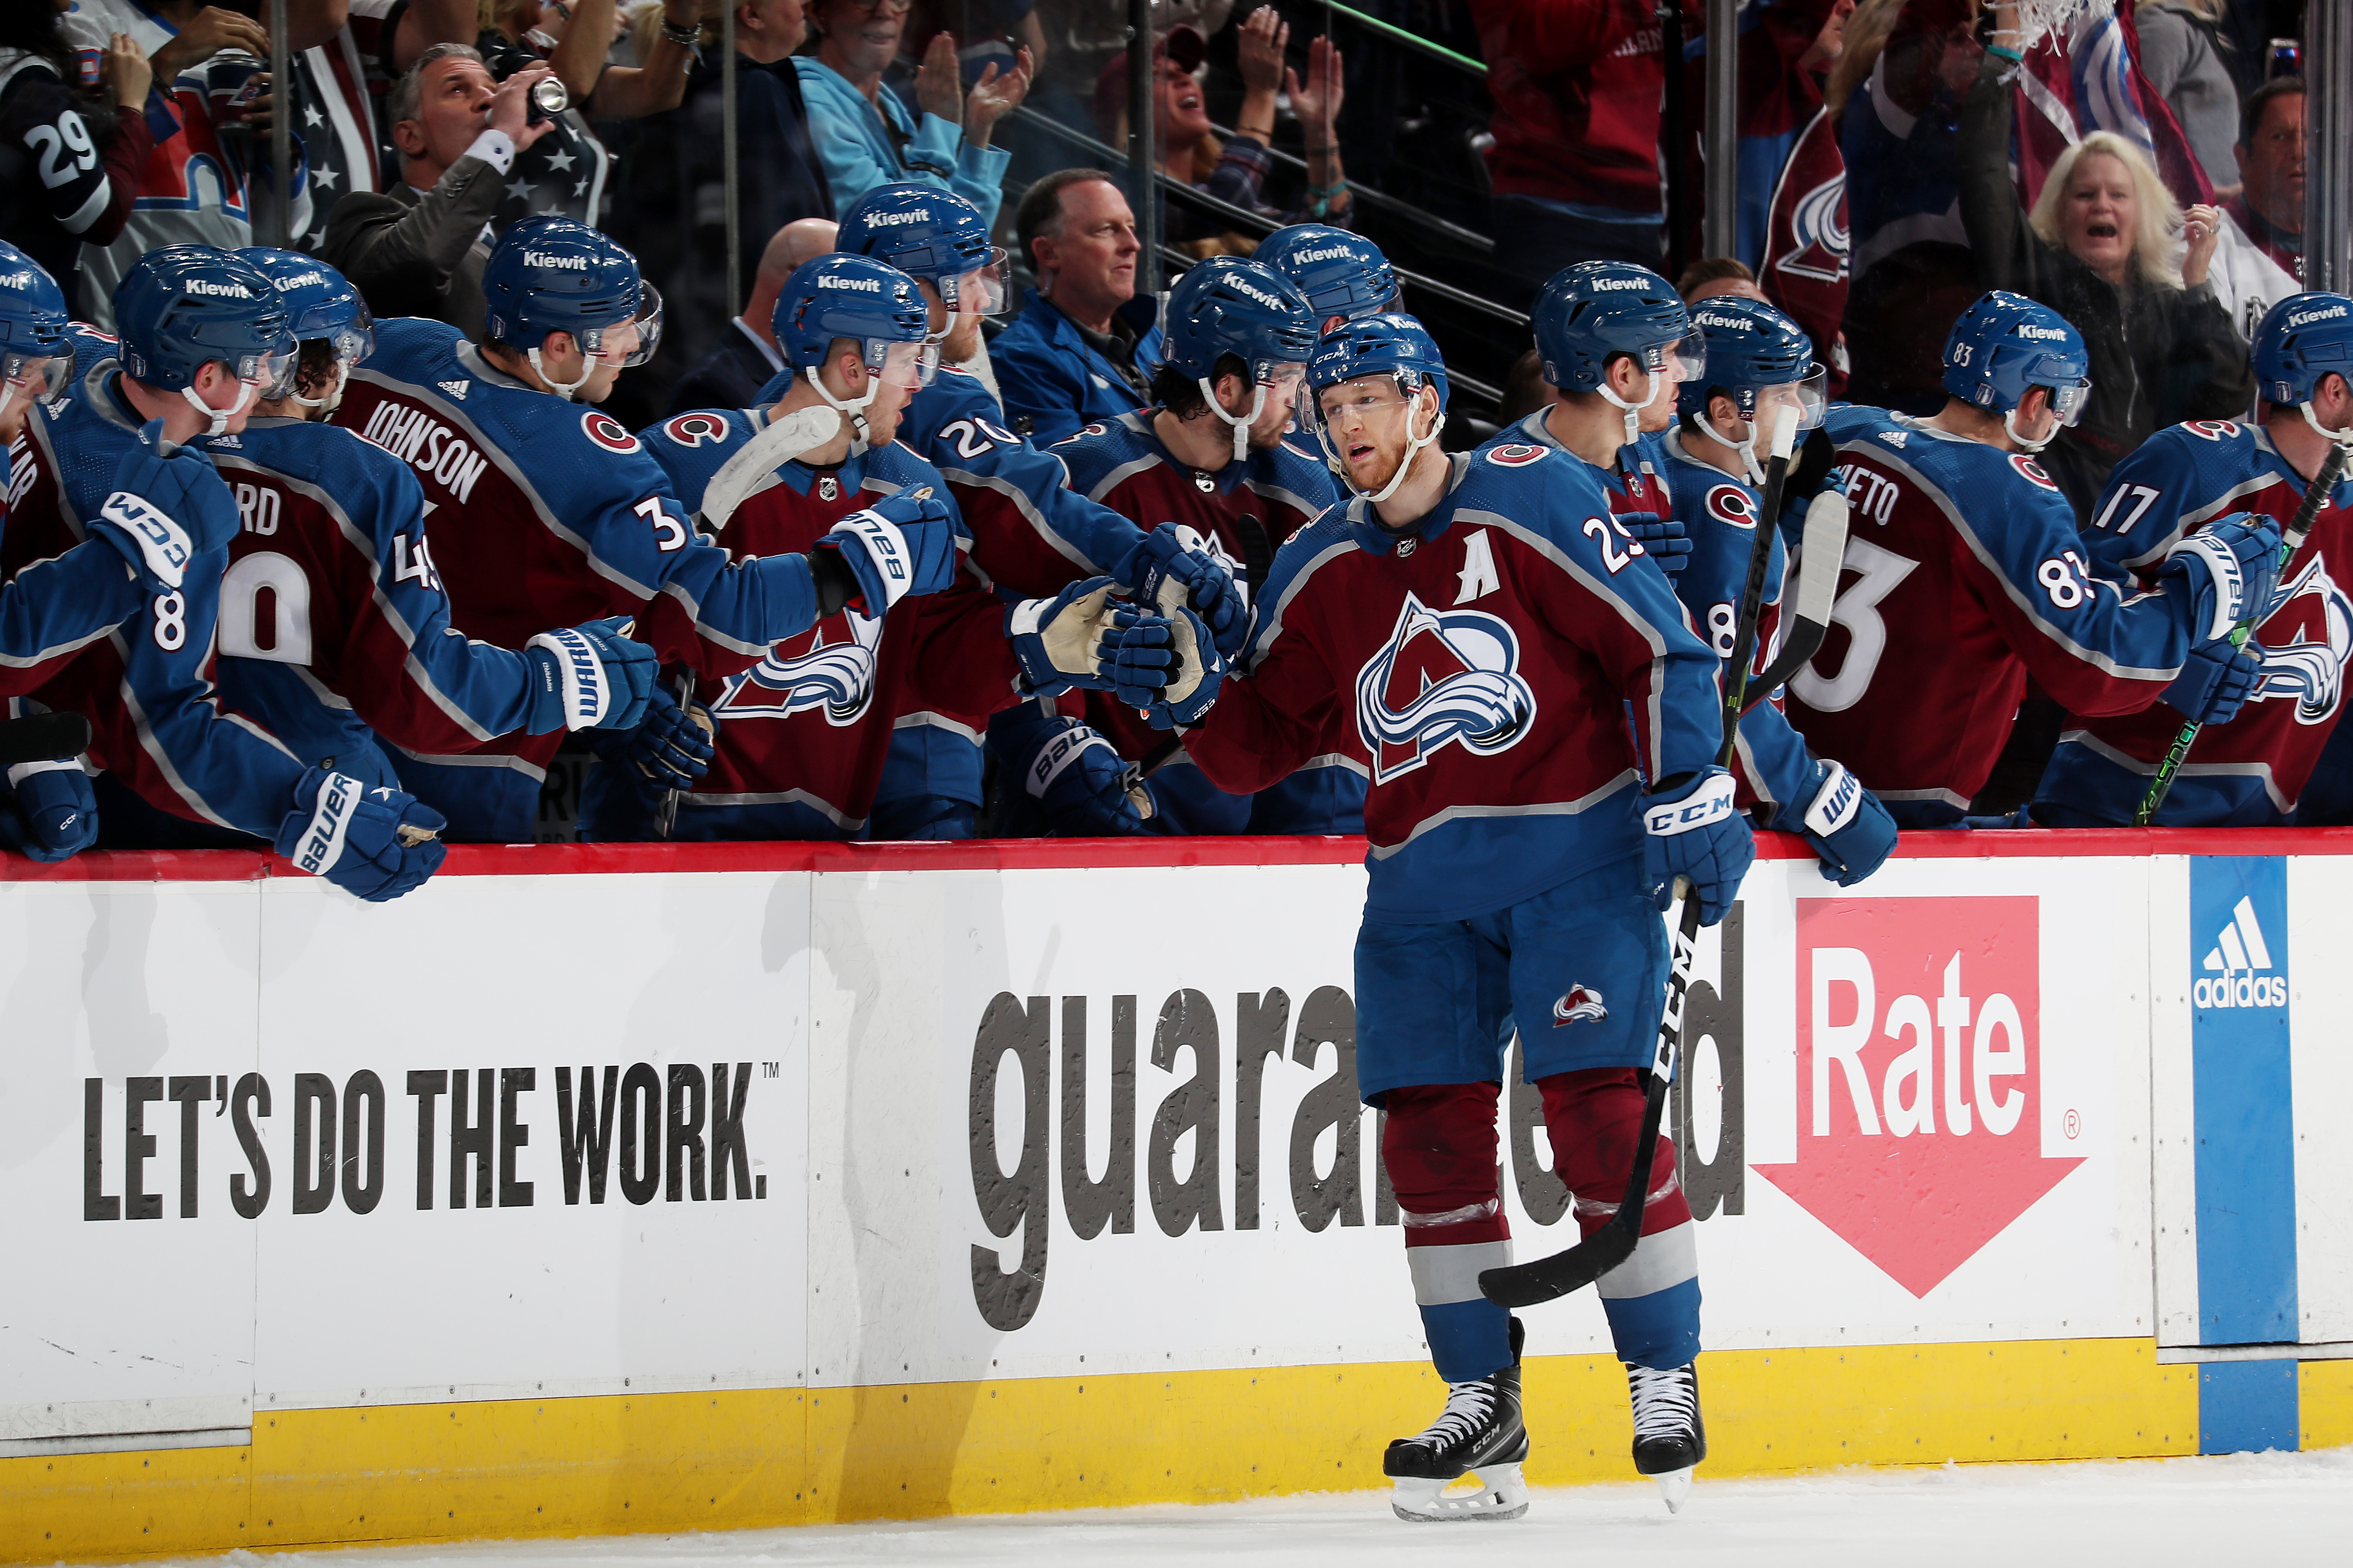 The Inside Story of the Colorado Avalanche's Turnaround - 5280